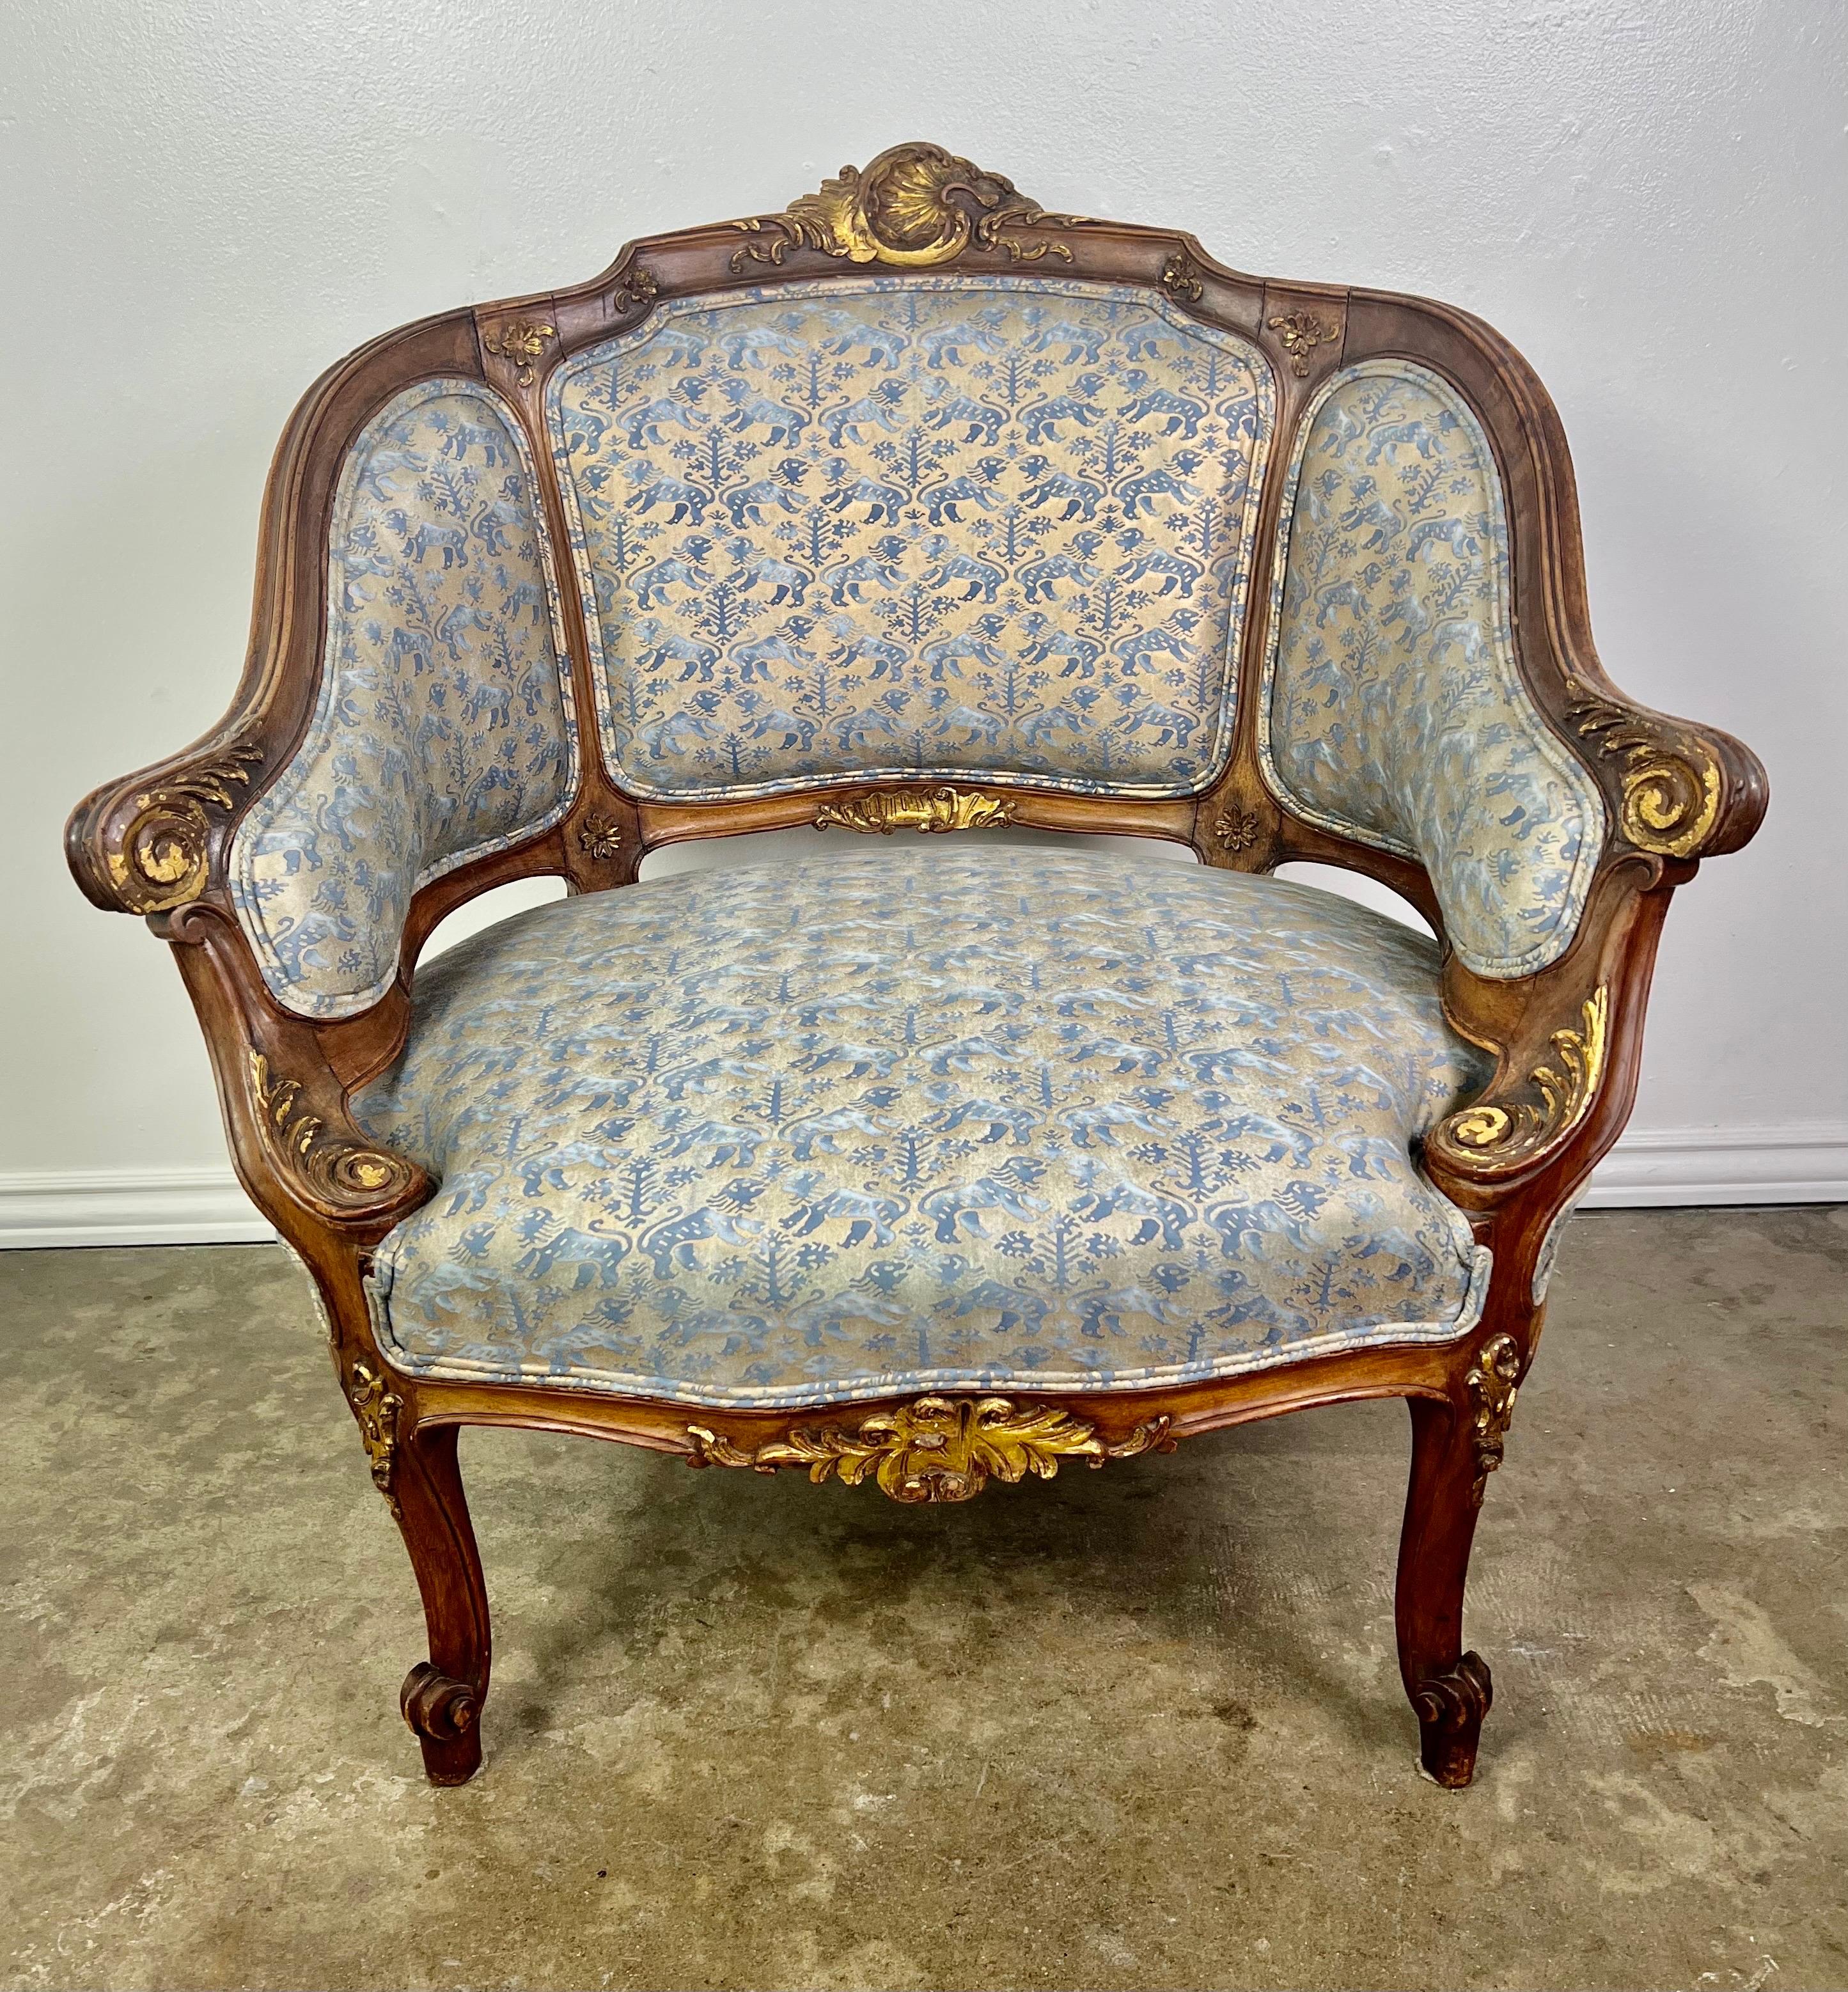 Gold Leaf French Armchair with Fortuny Fabric, 19th Century